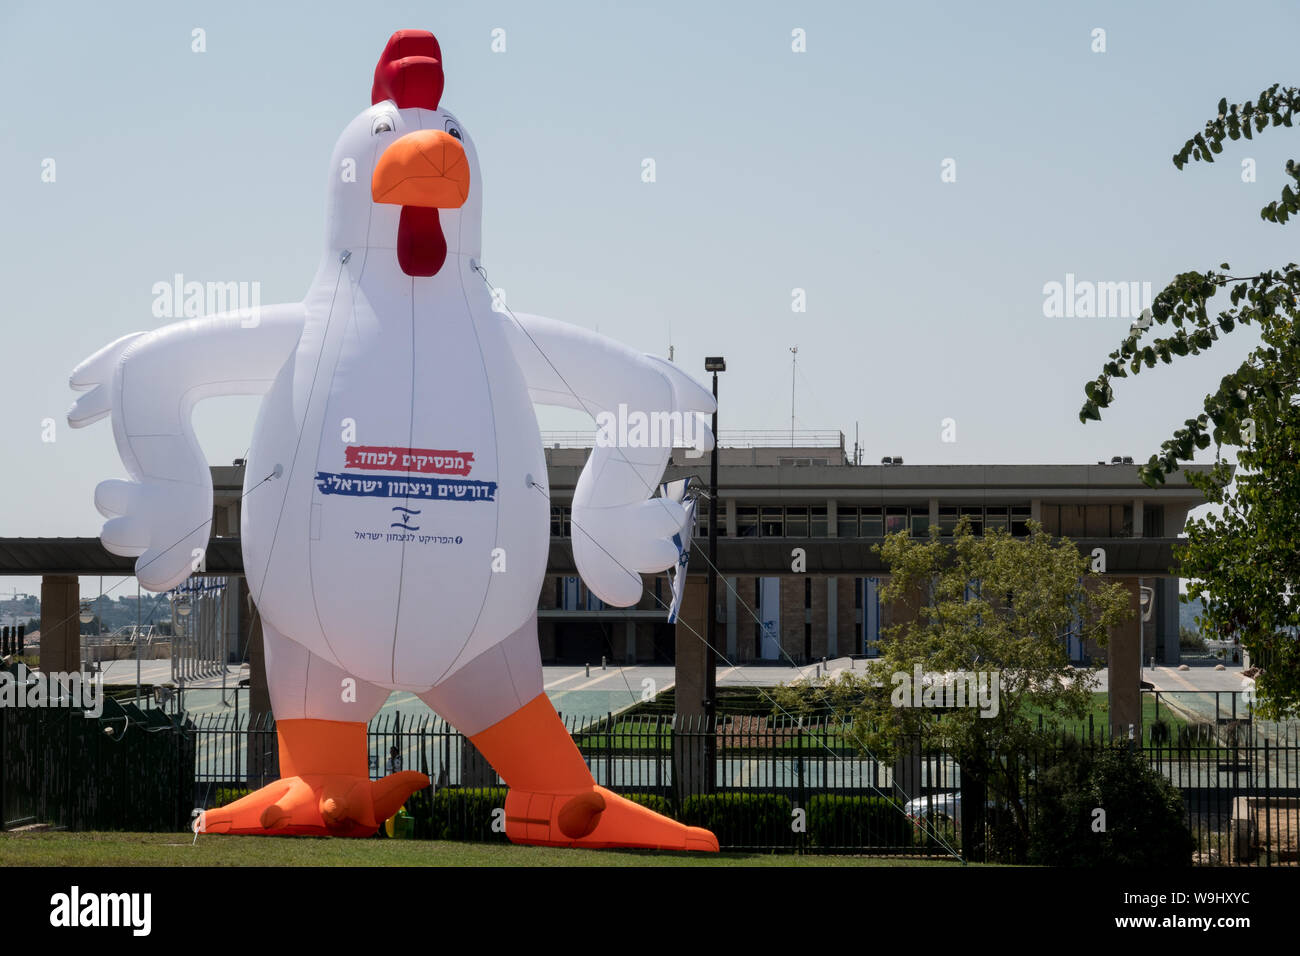 Jerusalem, Israel. 14th August, 2019. The Israel Victory Project sets up a protest installation at the Wohl Rose Garden opposite the Israeli Parliament building opposing government's allegedly submissive policy on Gaza and Palestinian terror. A huge inflatable chicken bears the Hebrew caption “Stop being afraid. We demand an Israeli victory.” Credit: Nir Alon/Alamy Live News. Stock Photo